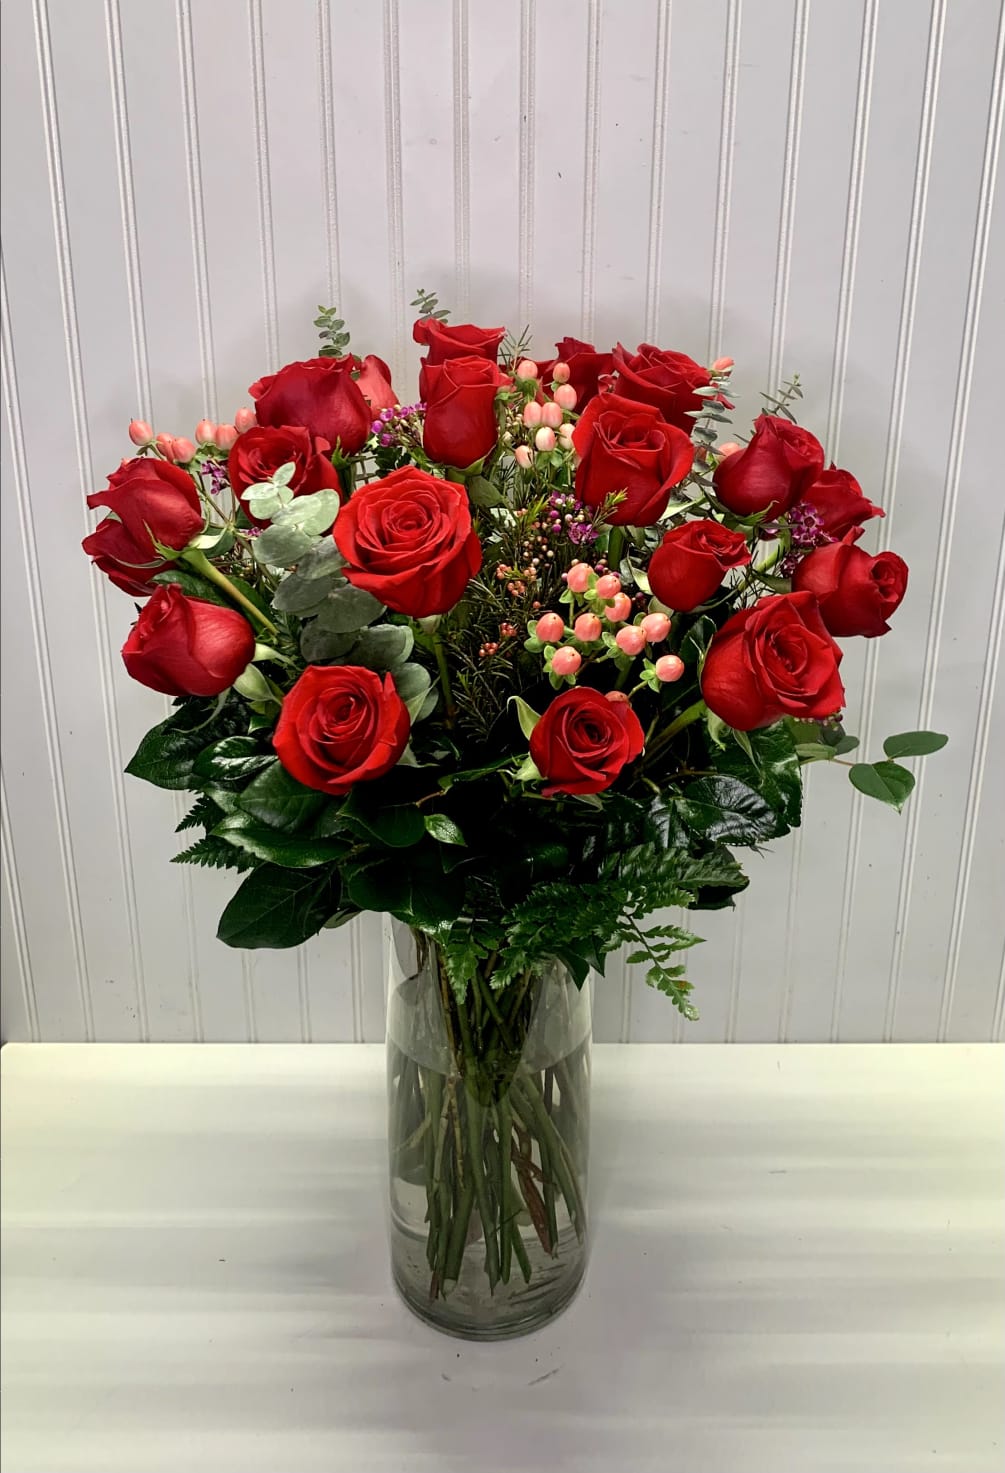 A beautiful arrangement with red freedom roses, perfec for that special person